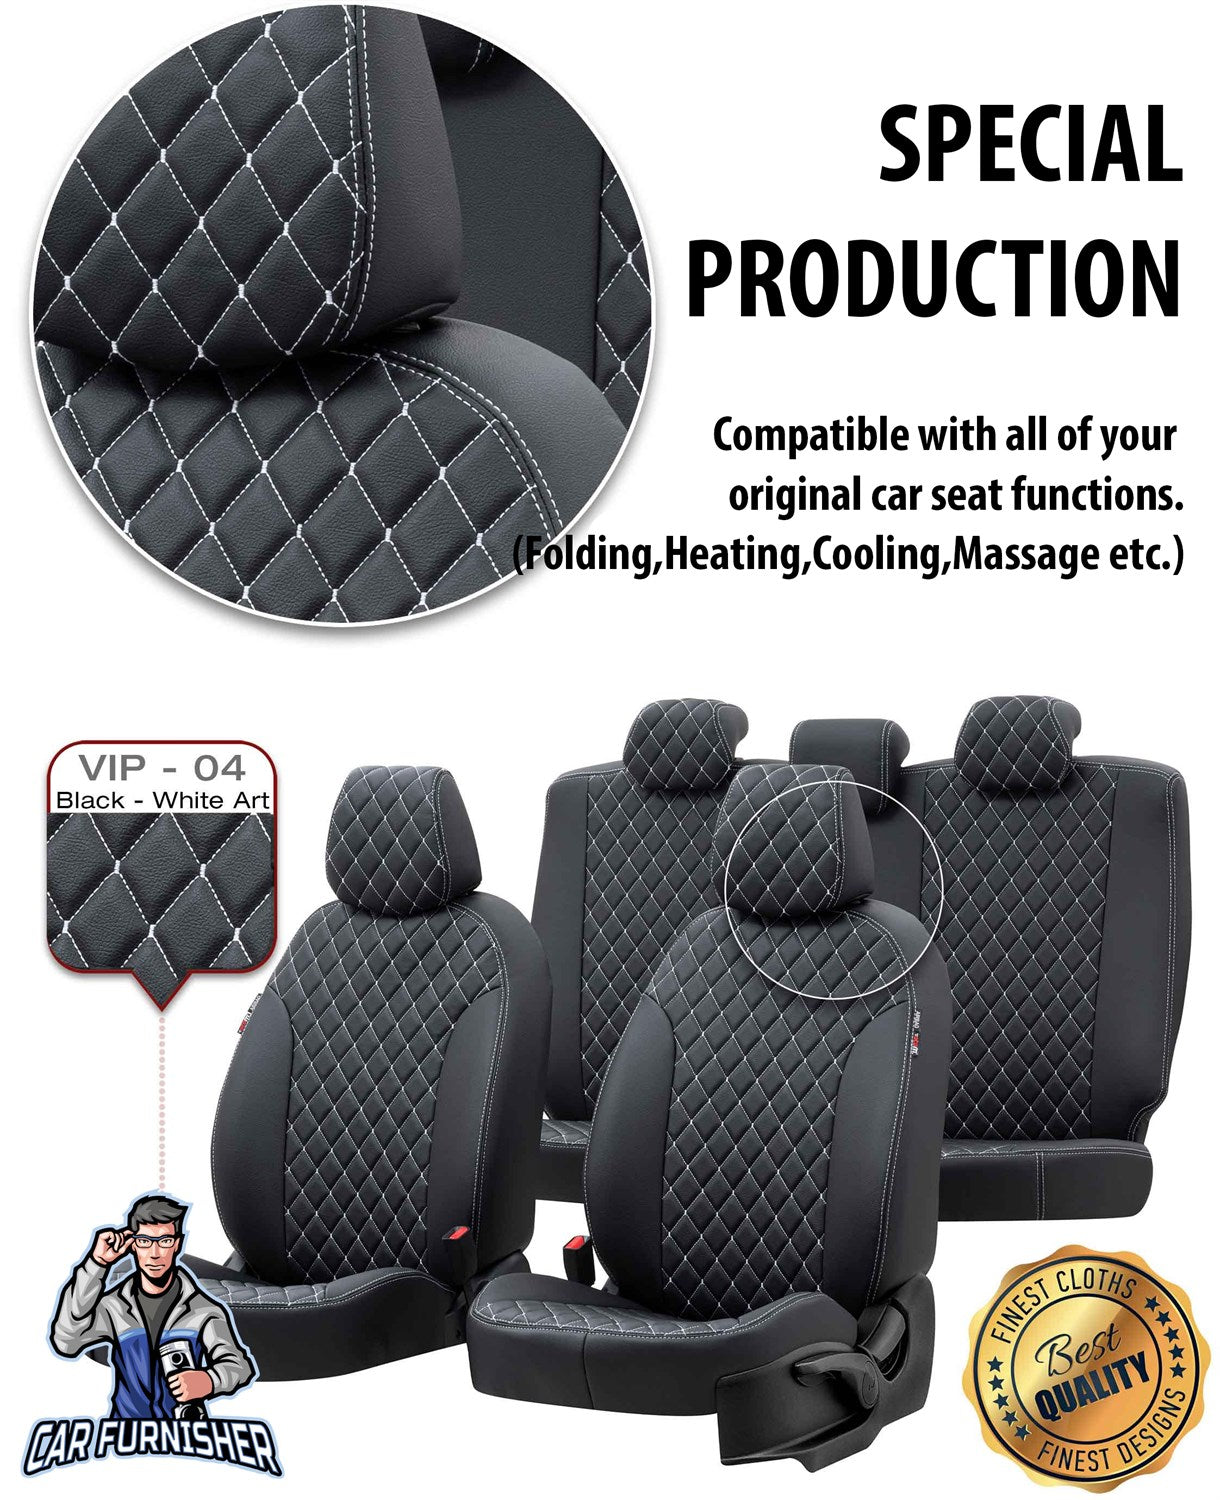 Ssangyong Kyron Seat Covers Madrid Leather Design Dark Red Leather